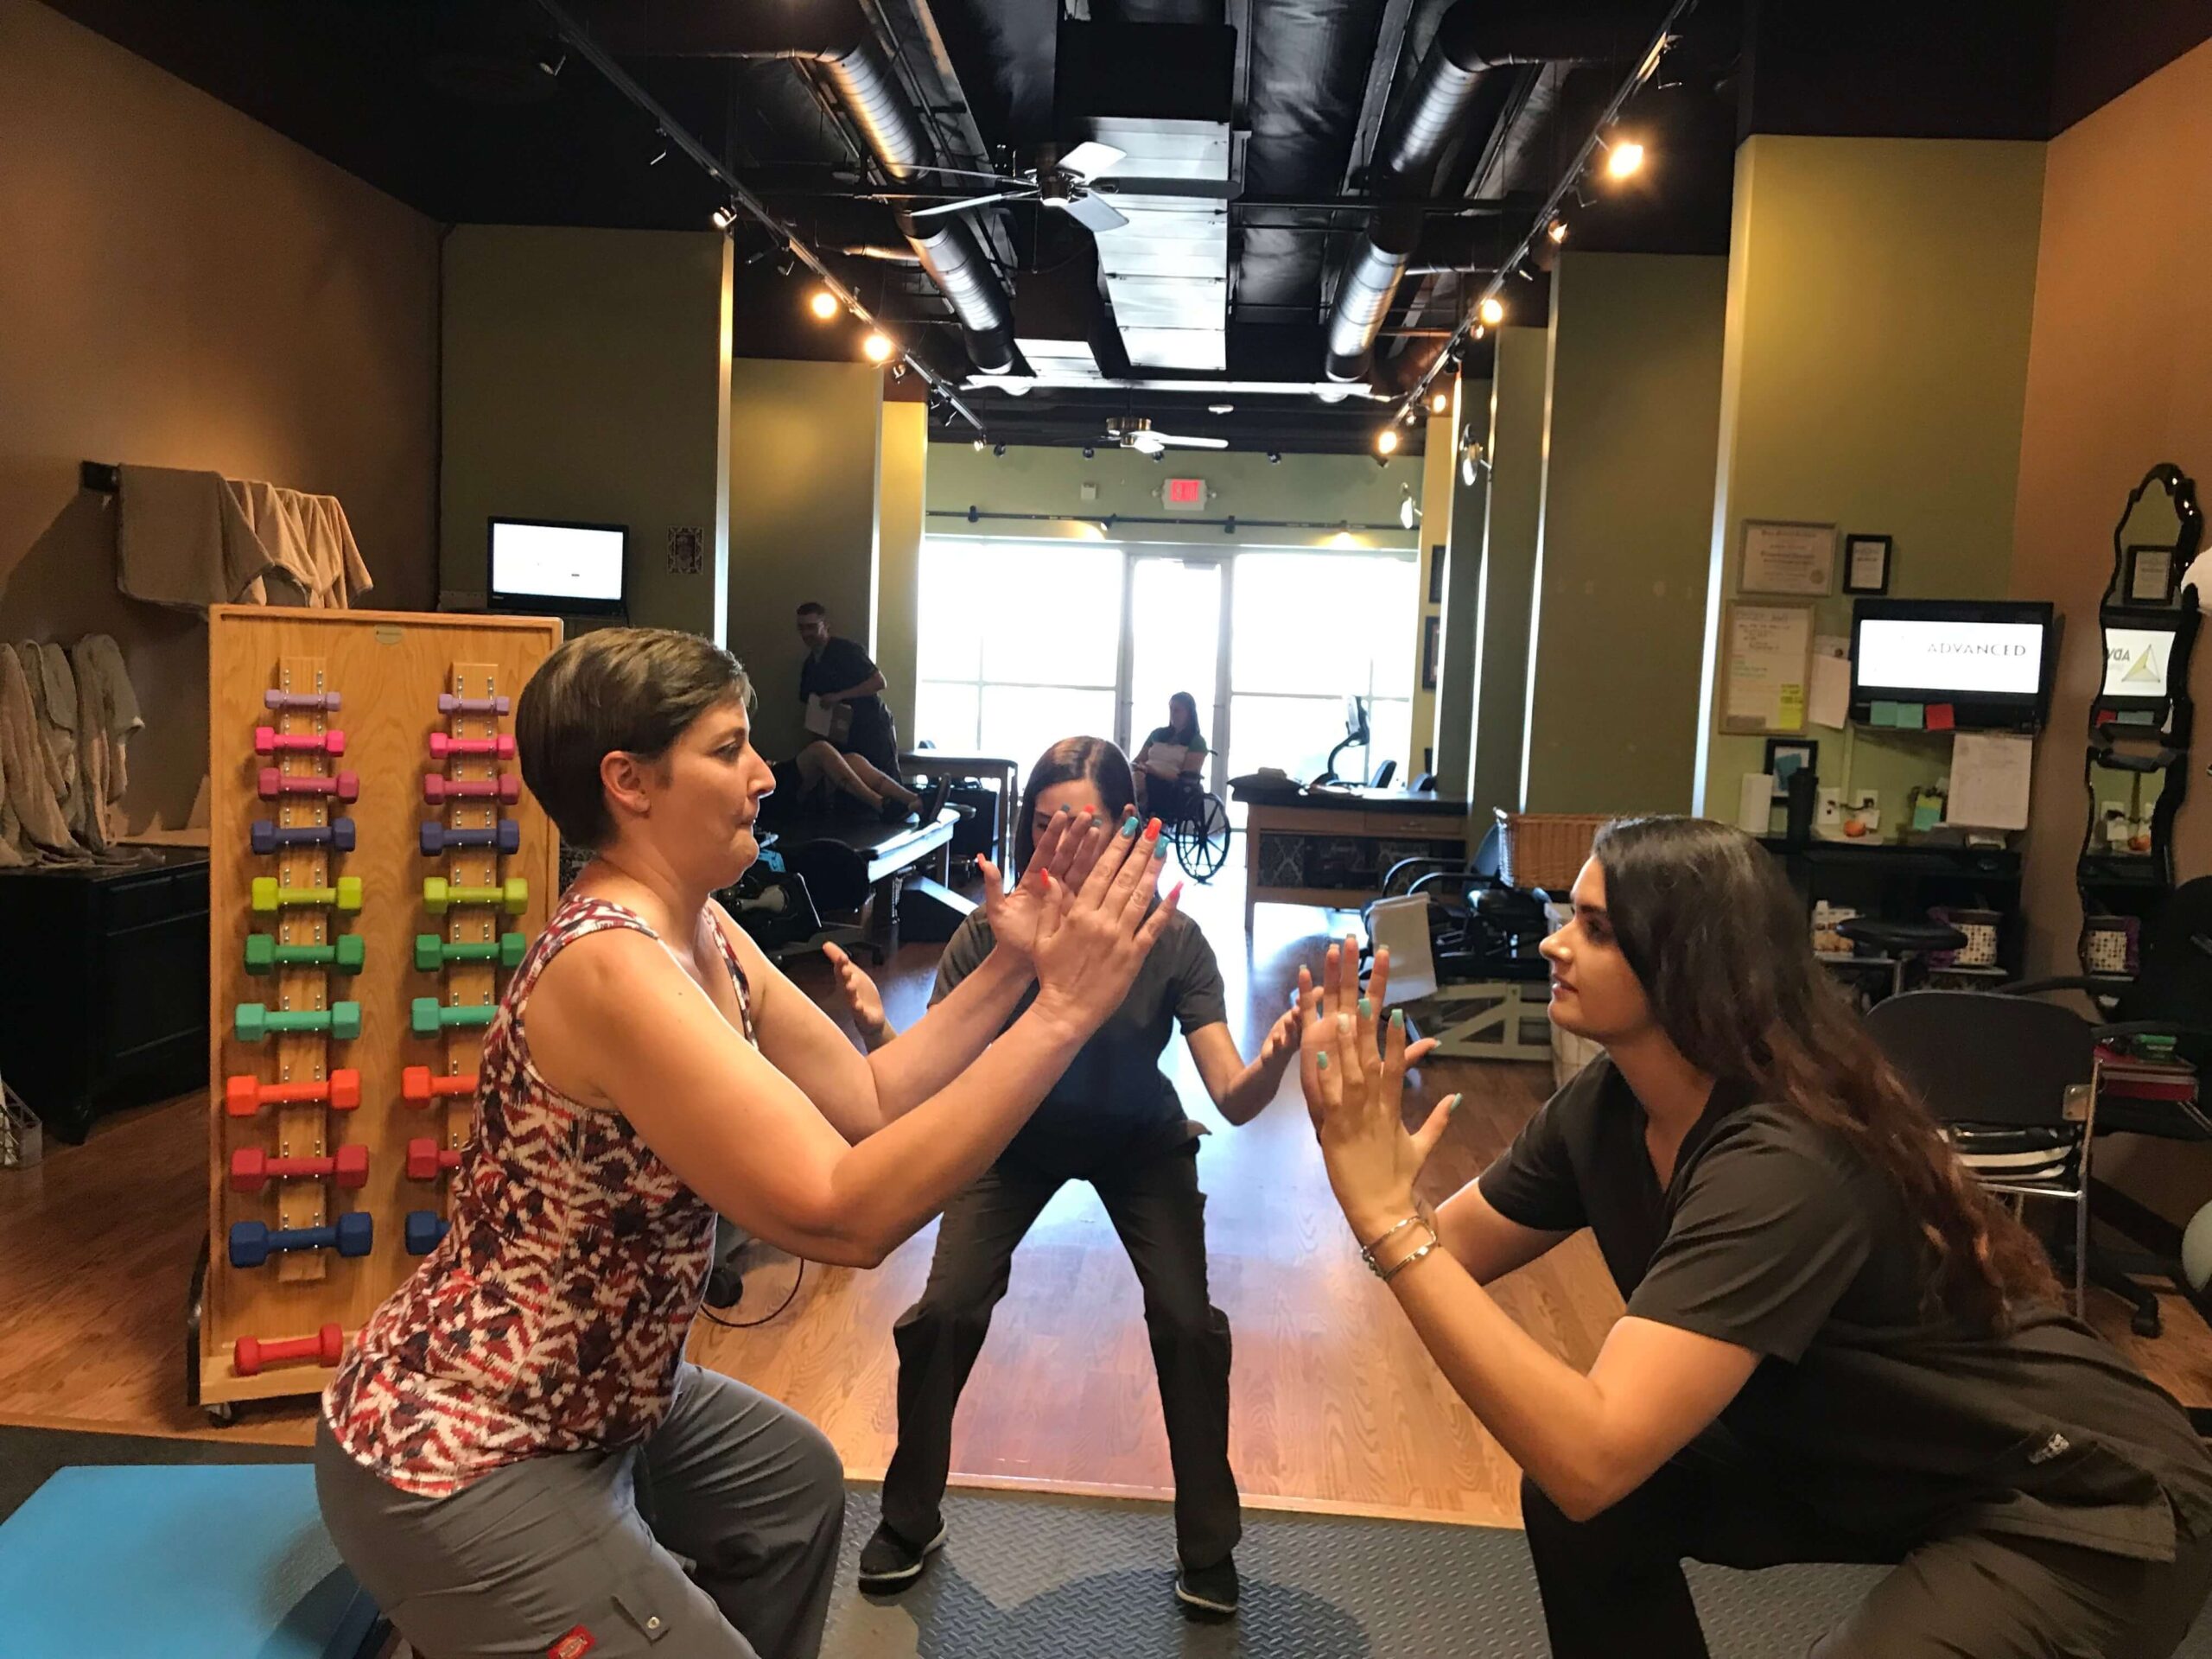 Two physical therapy assistants have joined the ranks at Advanced Spine and Posture in Las Vegas. Stephanie Winterroth and Destinae “Nae” Graham are both Las Vegas natives.